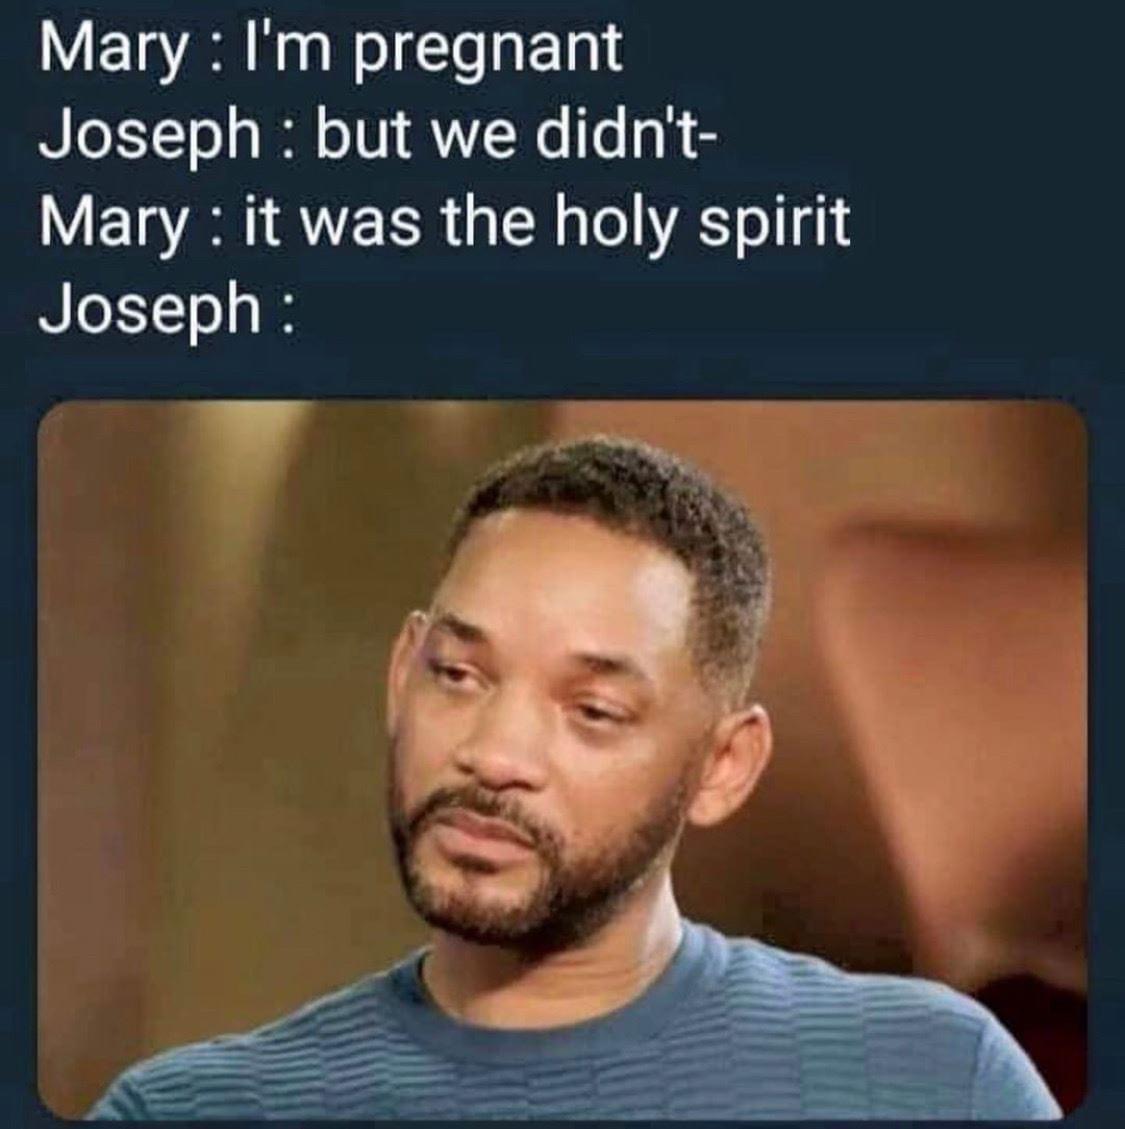 will smith red table talk sad - Mary I'm pregnant Joseph but we didn't Mary it was the holy spirit Joseph